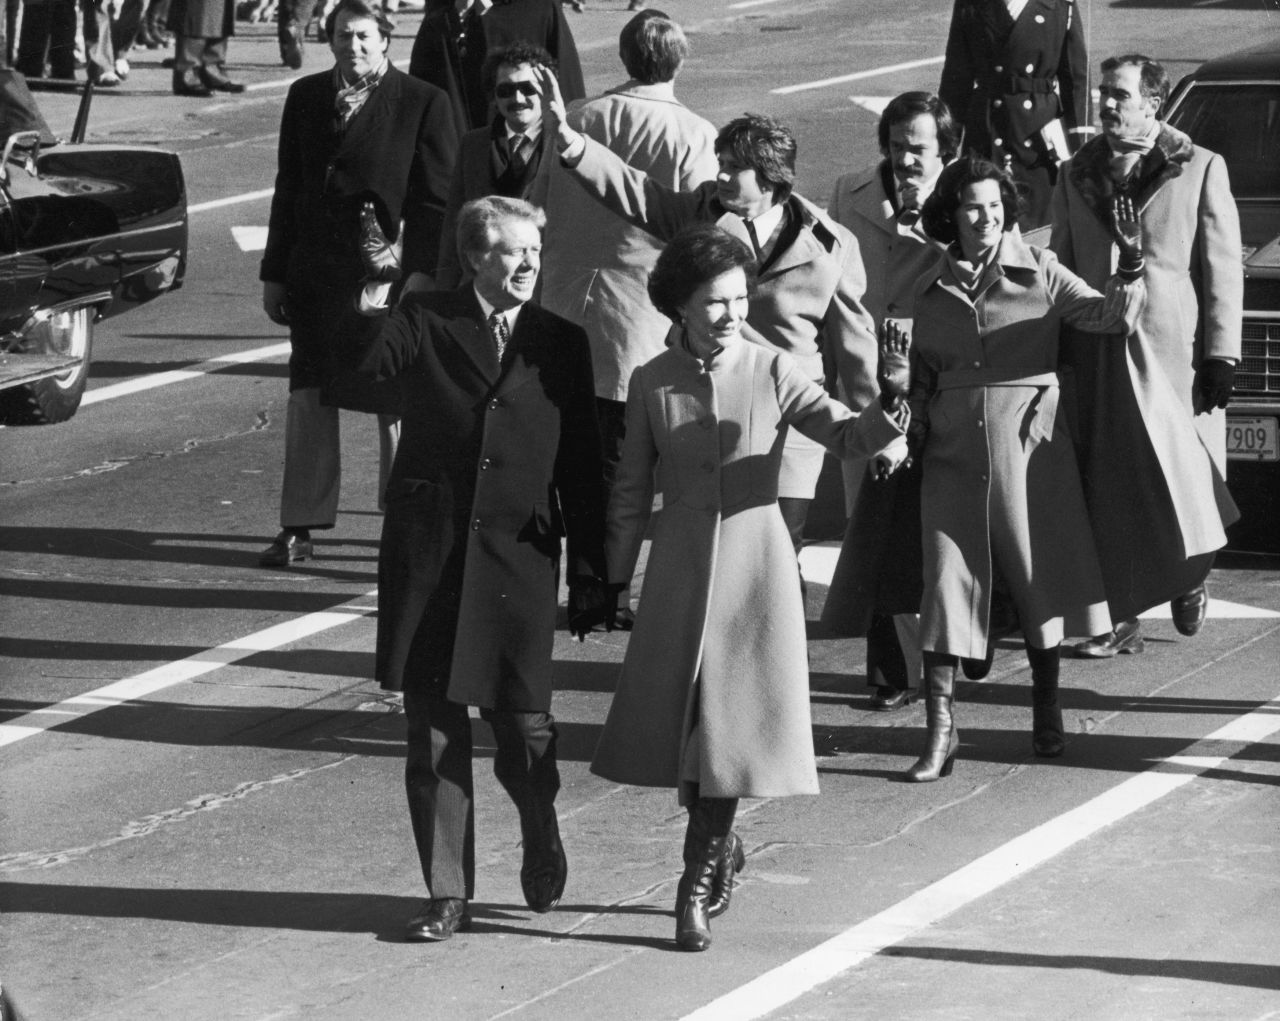 Carter holds his wife's hand during the inaugural parade.